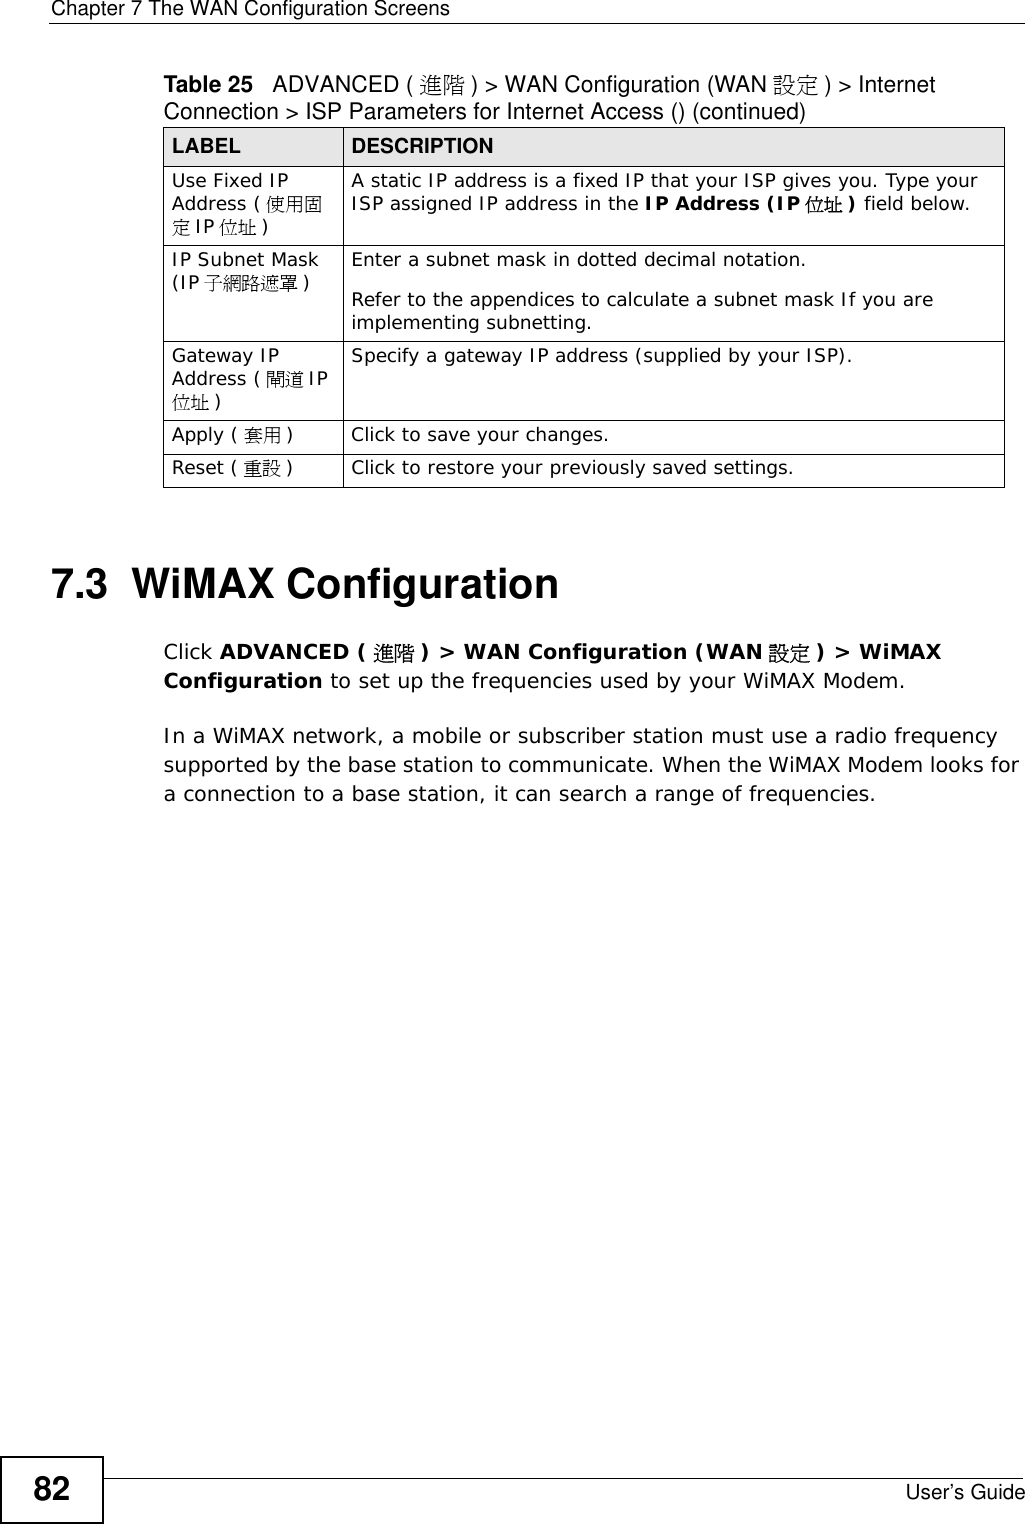 Chapter 7 The WAN Configuration ScreensUser’s Guide827.3  WiMAX ConfigurationClick ADVANCED ( 進階 ) &gt; WAN Configuration (WAN 設定 ) &gt; WiMAX Configuration to set up the frequencies used by your WiMAX Modem.In a WiMAX network, a mobile or subscriber station must use a radio frequency supported by the base station to communicate. When the WiMAX Modem looks for a connection to a base station, it can search a range of frequencies.Use Fixed IP Address ( 使用固定IP 位址 )A static IP address is a fixed IP that your ISP gives you. Type your ISP assigned IP address in the IP Address (IP 位址 ) field below. IP Subnet Mask (IP 子網路遮罩 )Enter a subnet mask in dotted decimal notation. Refer to the appendices to calculate a subnet mask If you are implementing subnetting.Gateway IP Address ( 閘道 IP位址 )Specify a gateway IP address (supplied by your ISP).Apply ( 套用 ) Click to save your changes.Reset ( 重設 ) Click to restore your previously saved settings.Table 25   ADVANCED ( 進階 ) &gt; WAN Configuration (WAN 設定 ) &gt; Internet Connection &gt; ISP Parameters for Internet Access () (continued)LABEL DESCRIPTION